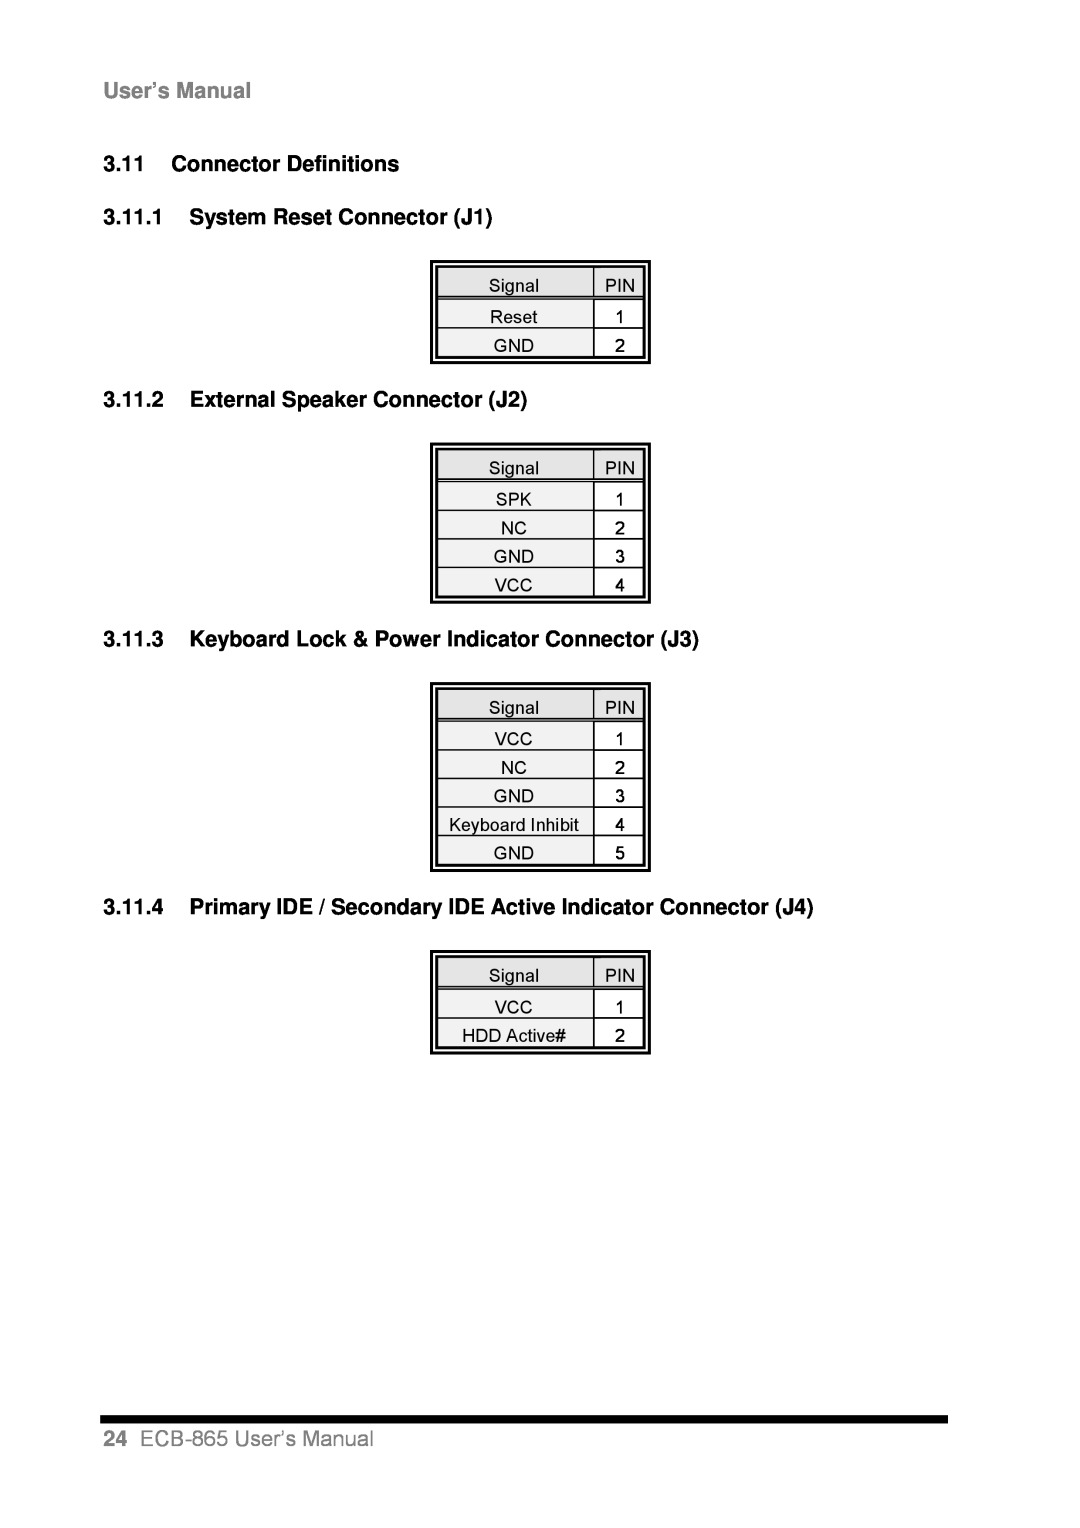 Intel ECB-865 3.11Connector Definitions, 3.11.1System Reset Connector J1, External Speaker Connector J2, User’s Manual 